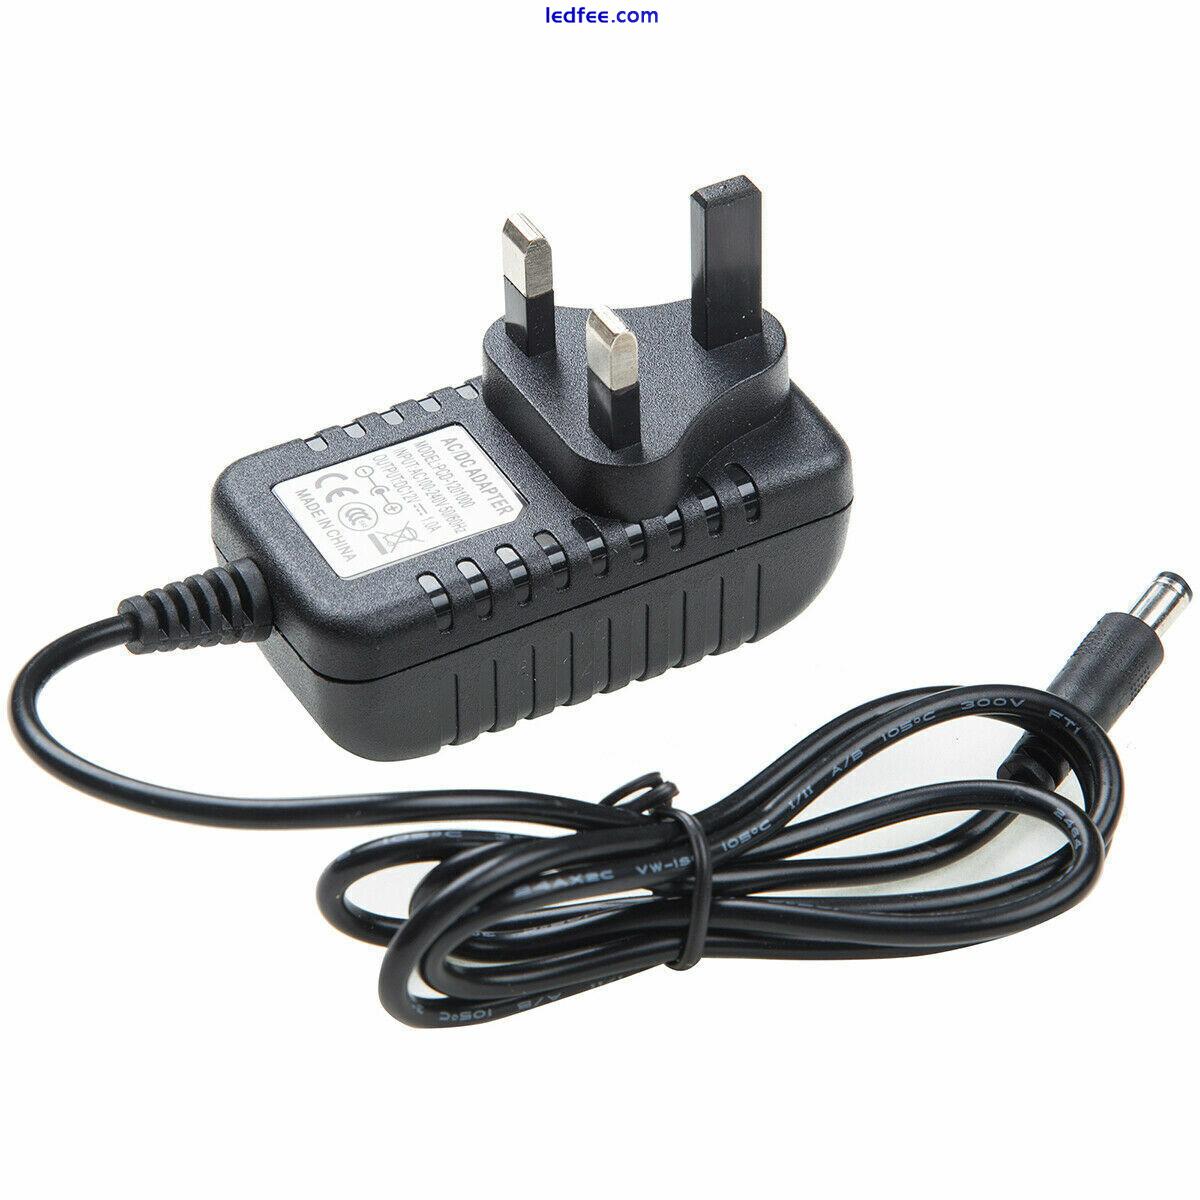 12V 1A 2A AC/DC UK Power Supply Adapter Safety Charger For LED Strip CCTV 1 